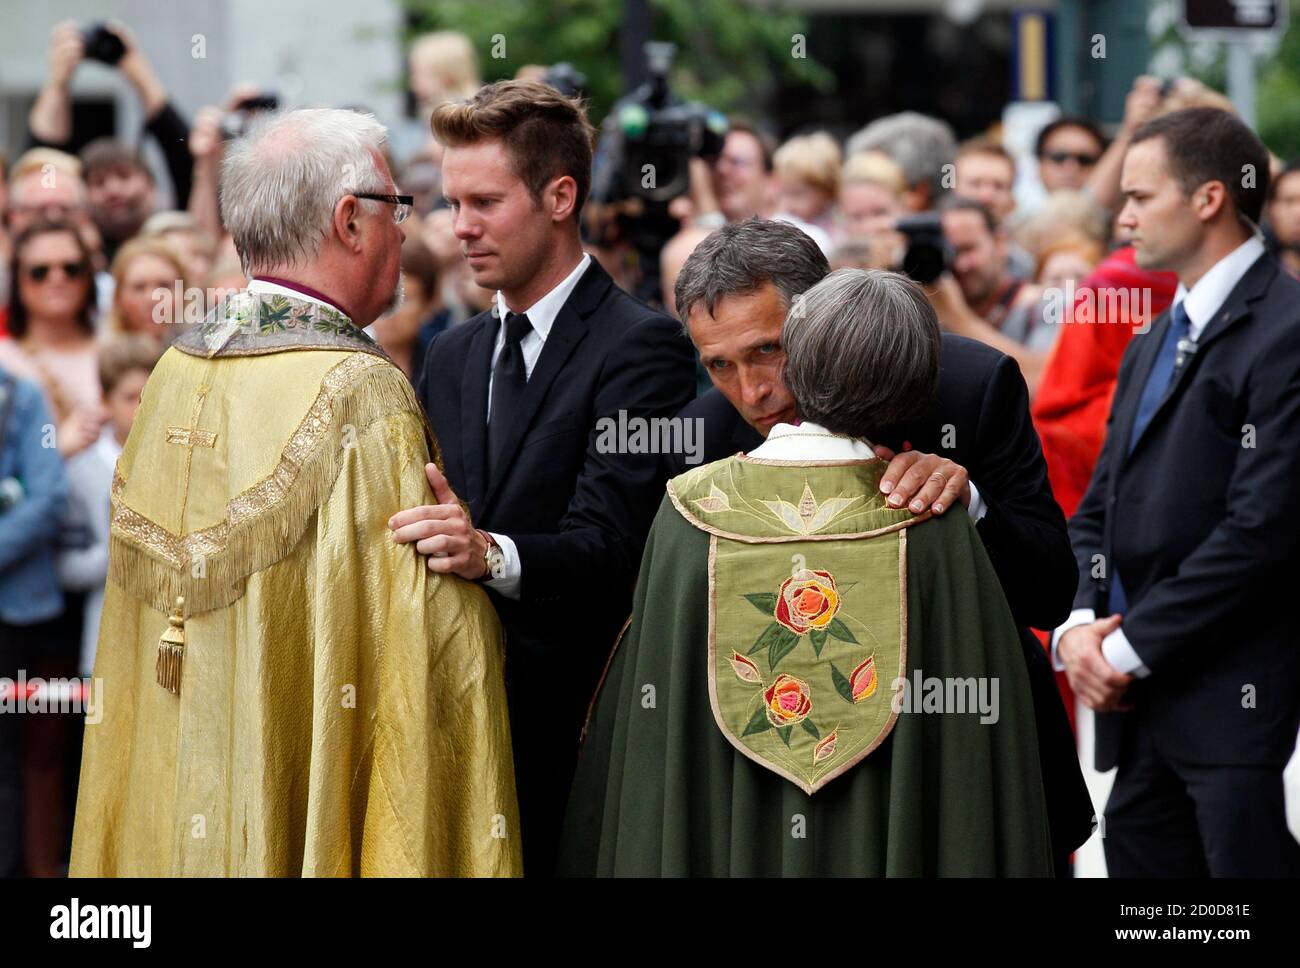 Norwegian Prime Minister Jens Stoltenberg (R) and Eskil Pedersen (2nd L), the leader of the youth wing of ruling Labour Party, are comforted by priests after a memorial service at a cathedral in Oslo, July 24, 2011. A right-wing zealot who admitted to bomb and gun attacks in Norway that killed 92 people on Friday claims he acted alone, Norway's police said on Sunday. REUTERS/Wolfgang Rattay (NORWAY - Tags: CIVIL UNREST CRIME LAW POLITICS RELIGION) Stock Photo